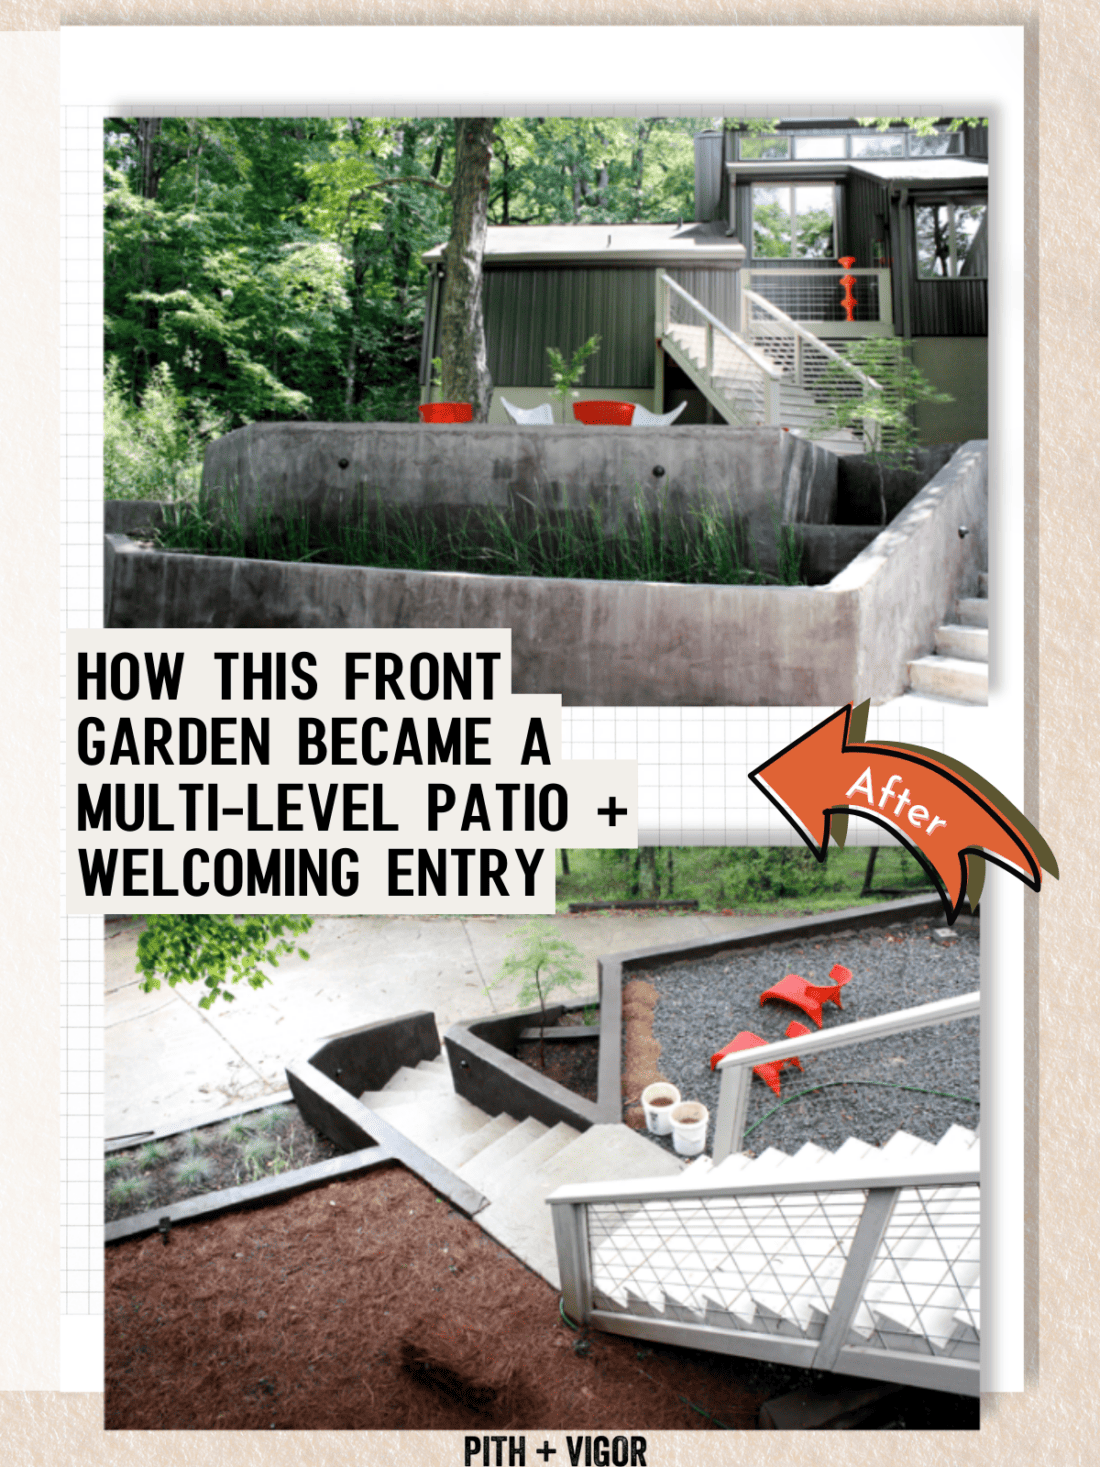 How this front garden became a welcoming entry.